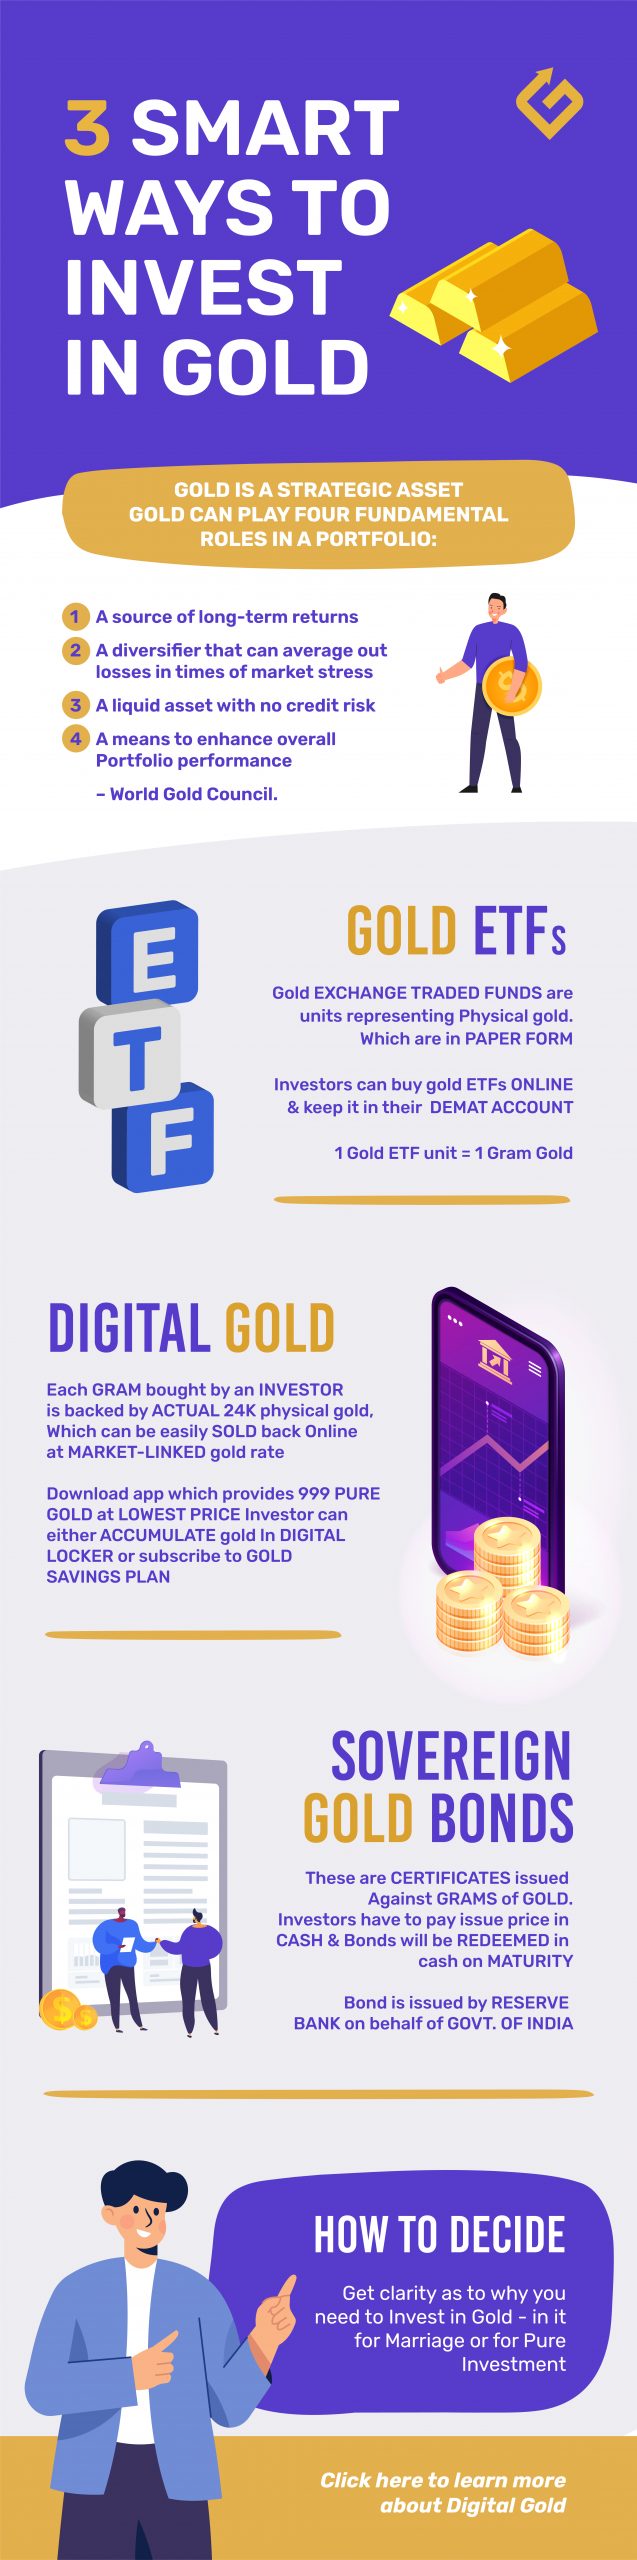 3 best ways to invest in gold in 2021 infographic